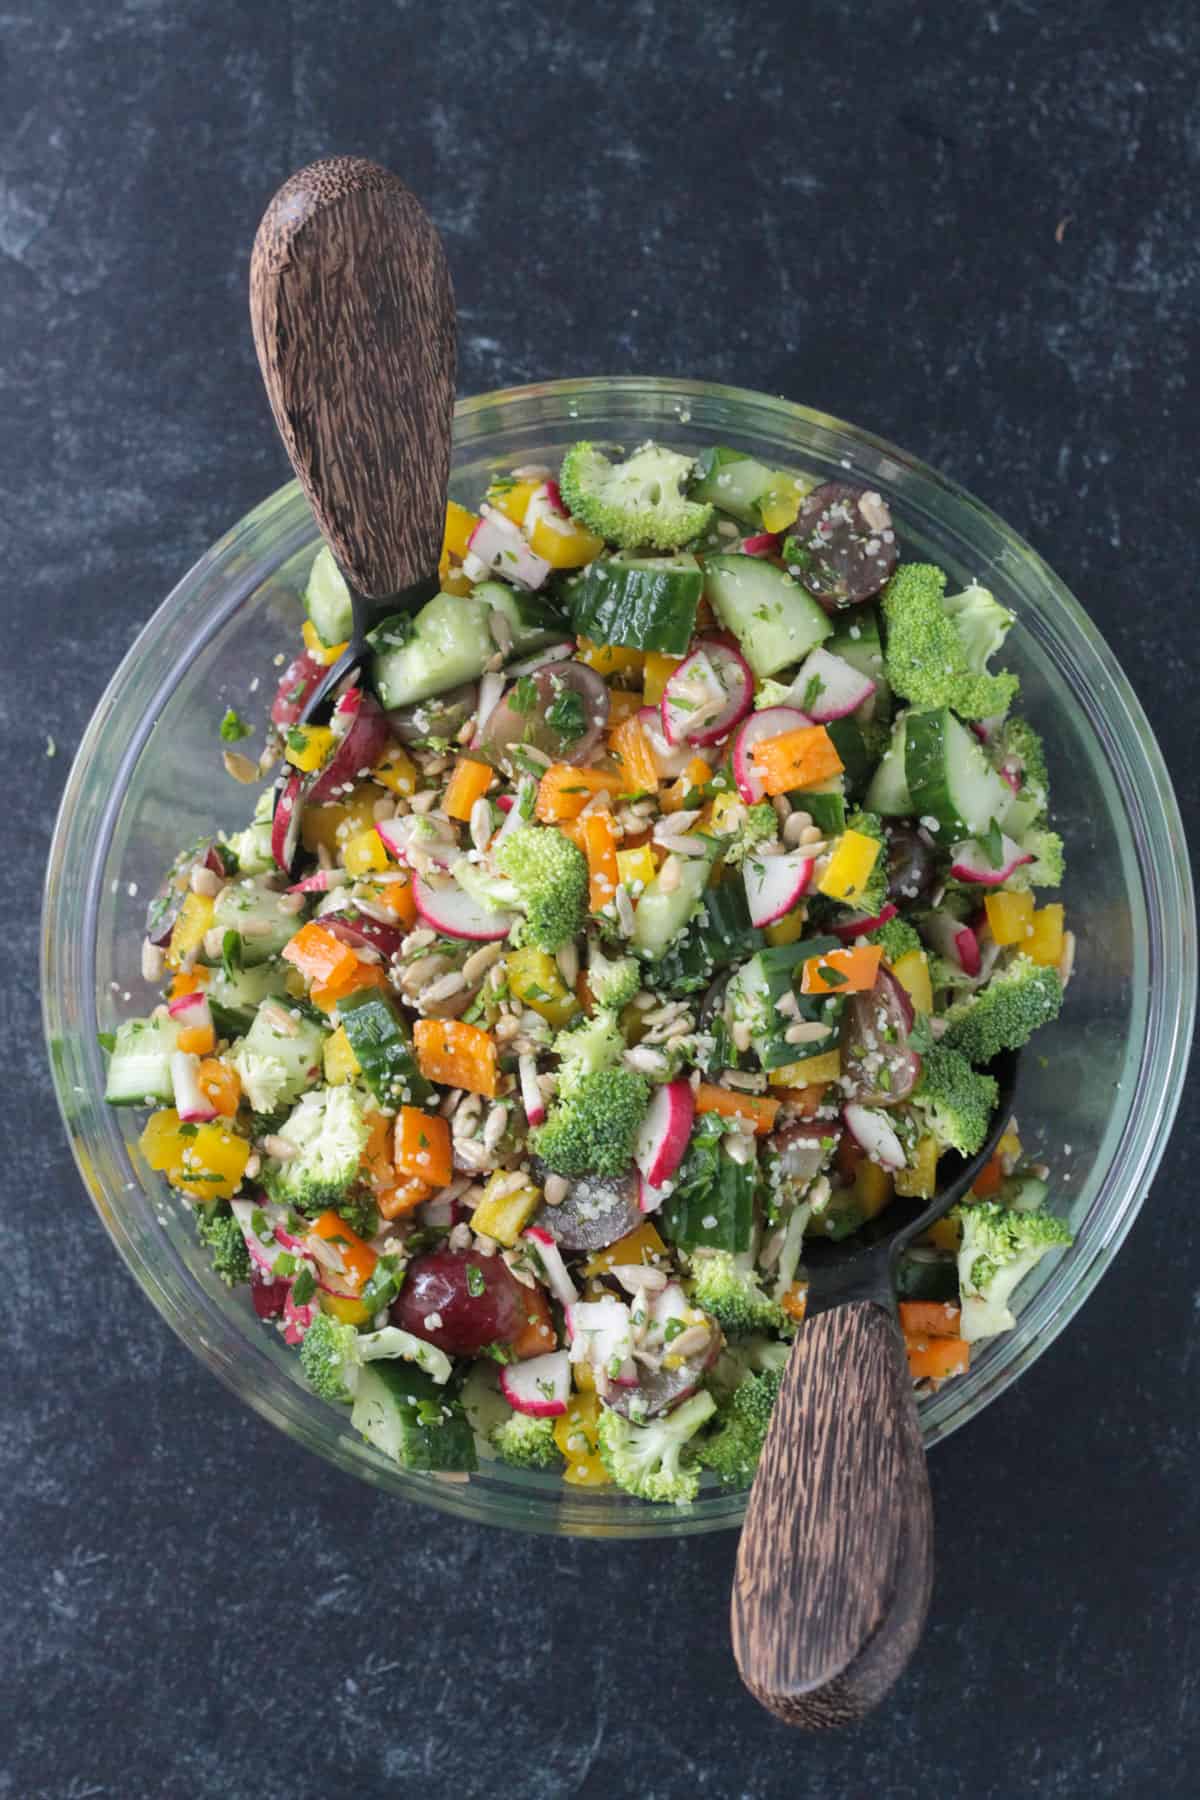 An ideal organic product salad for summer